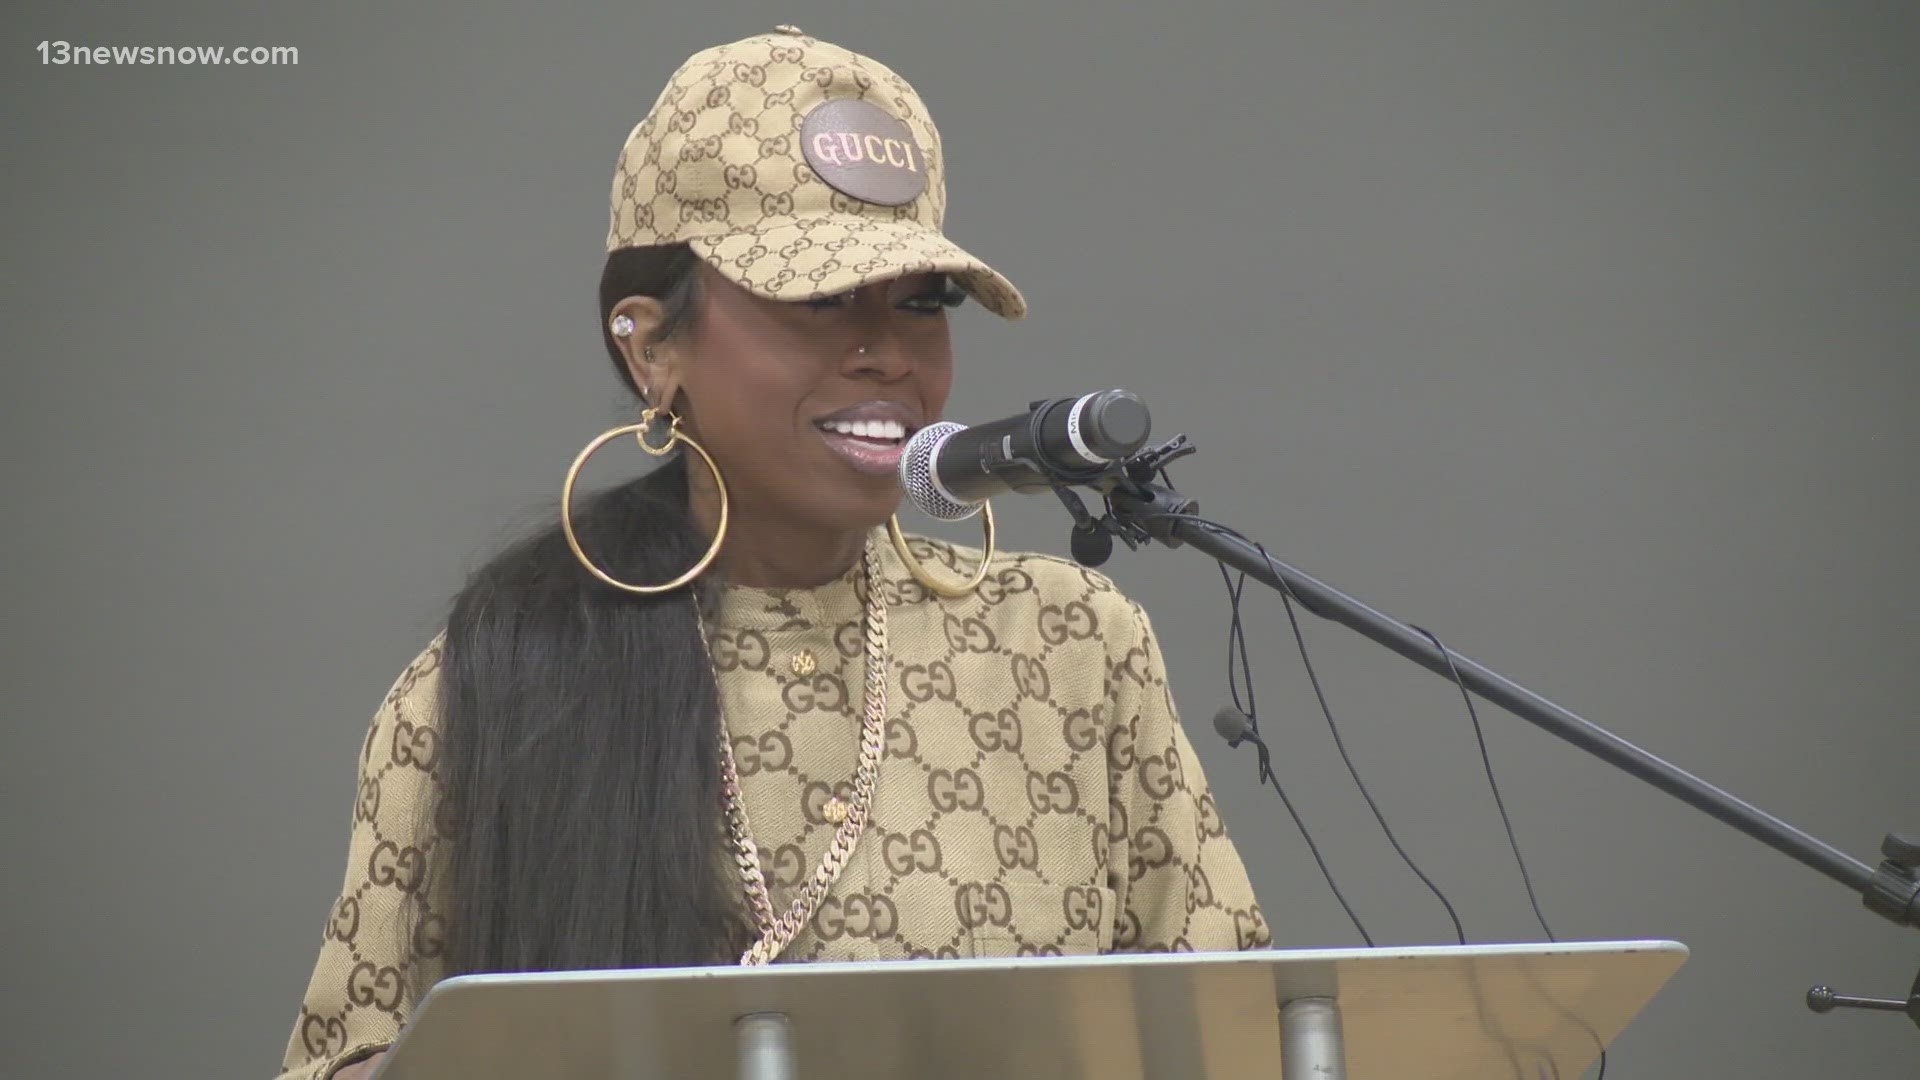 A special announcement from Portsmouth native and Grammy Award-winning artist Missy Elliott!